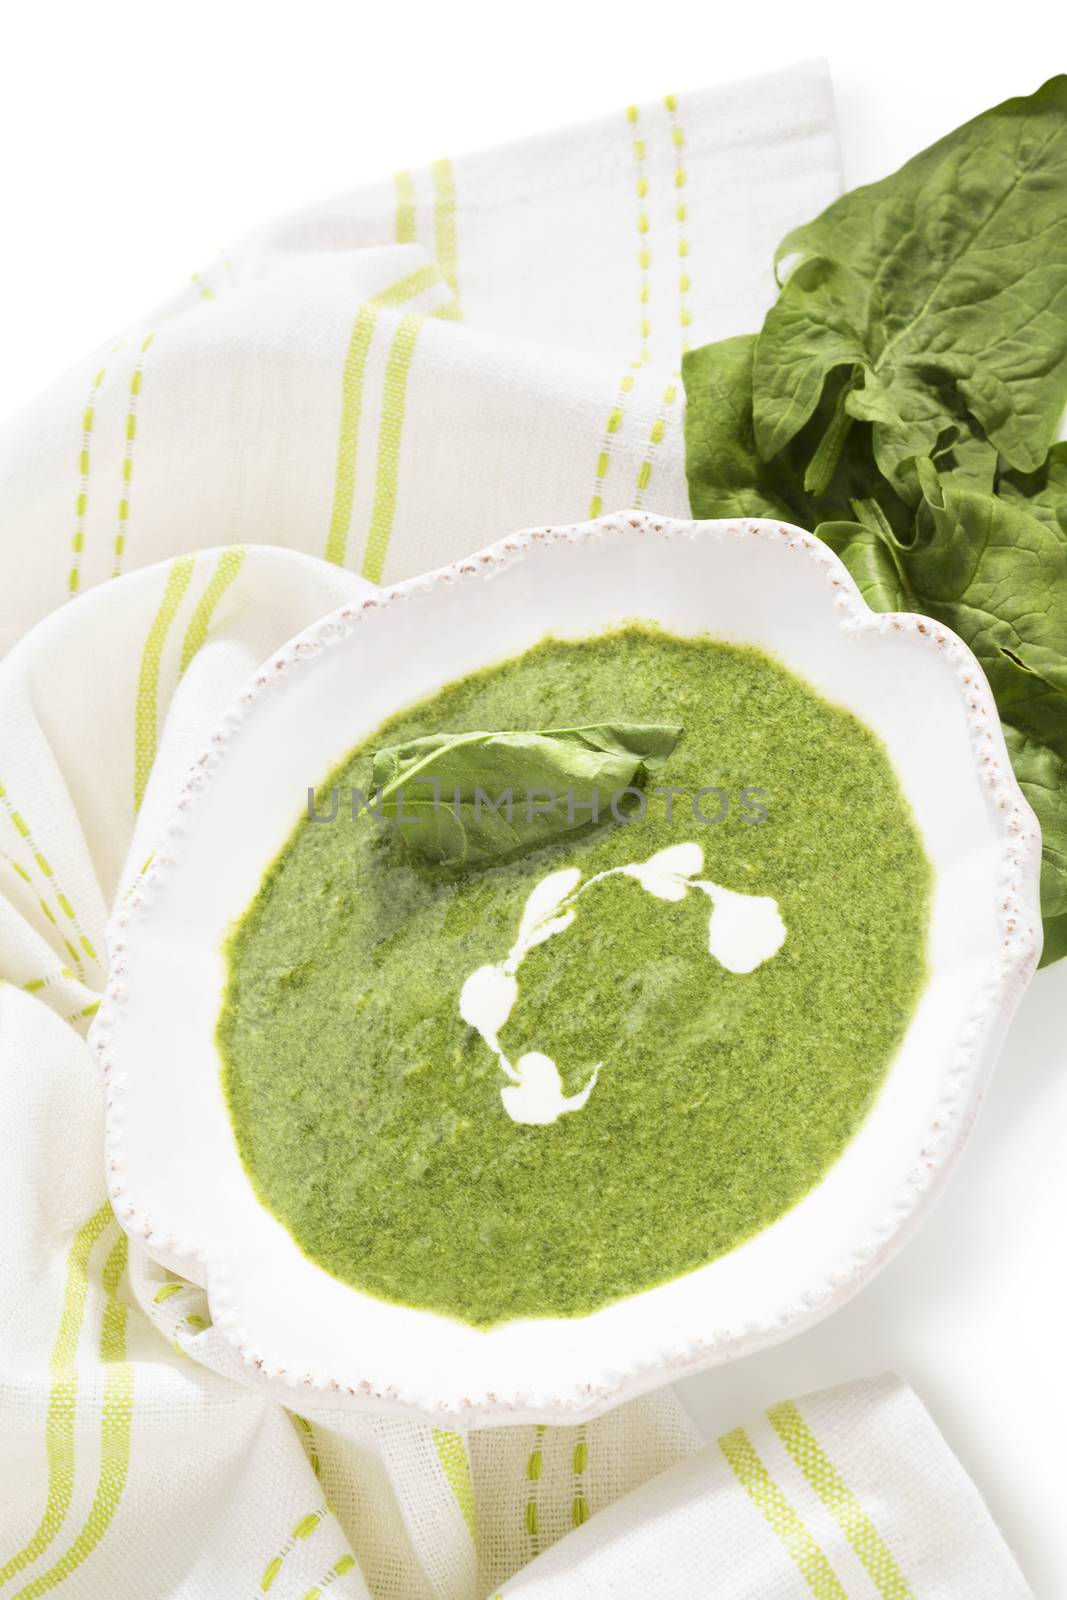 Spinach soup and fresh spinach. by eskymaks